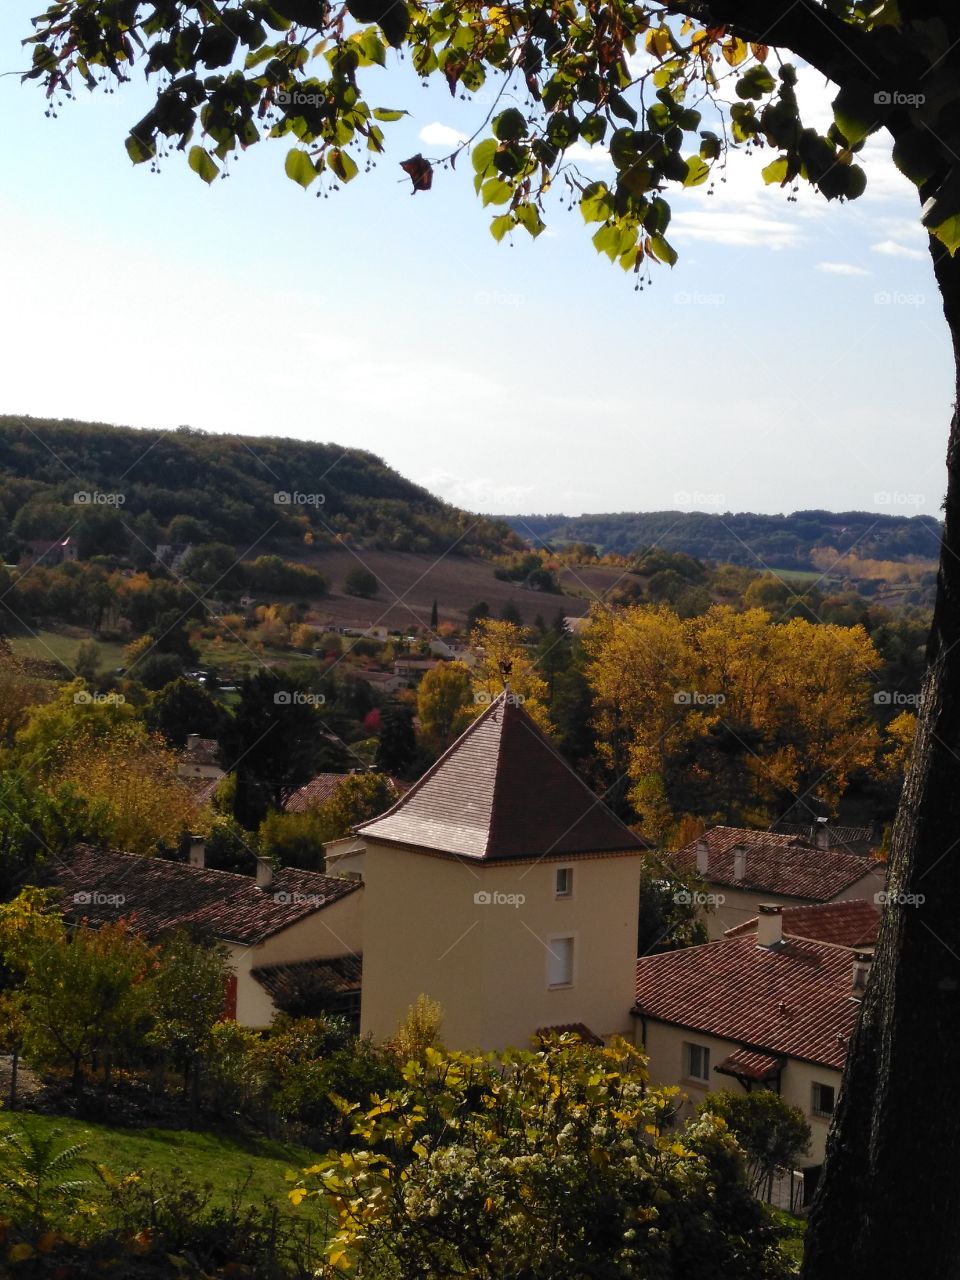 A landary in France. It's a little town in the middle. The pictures taked in October.